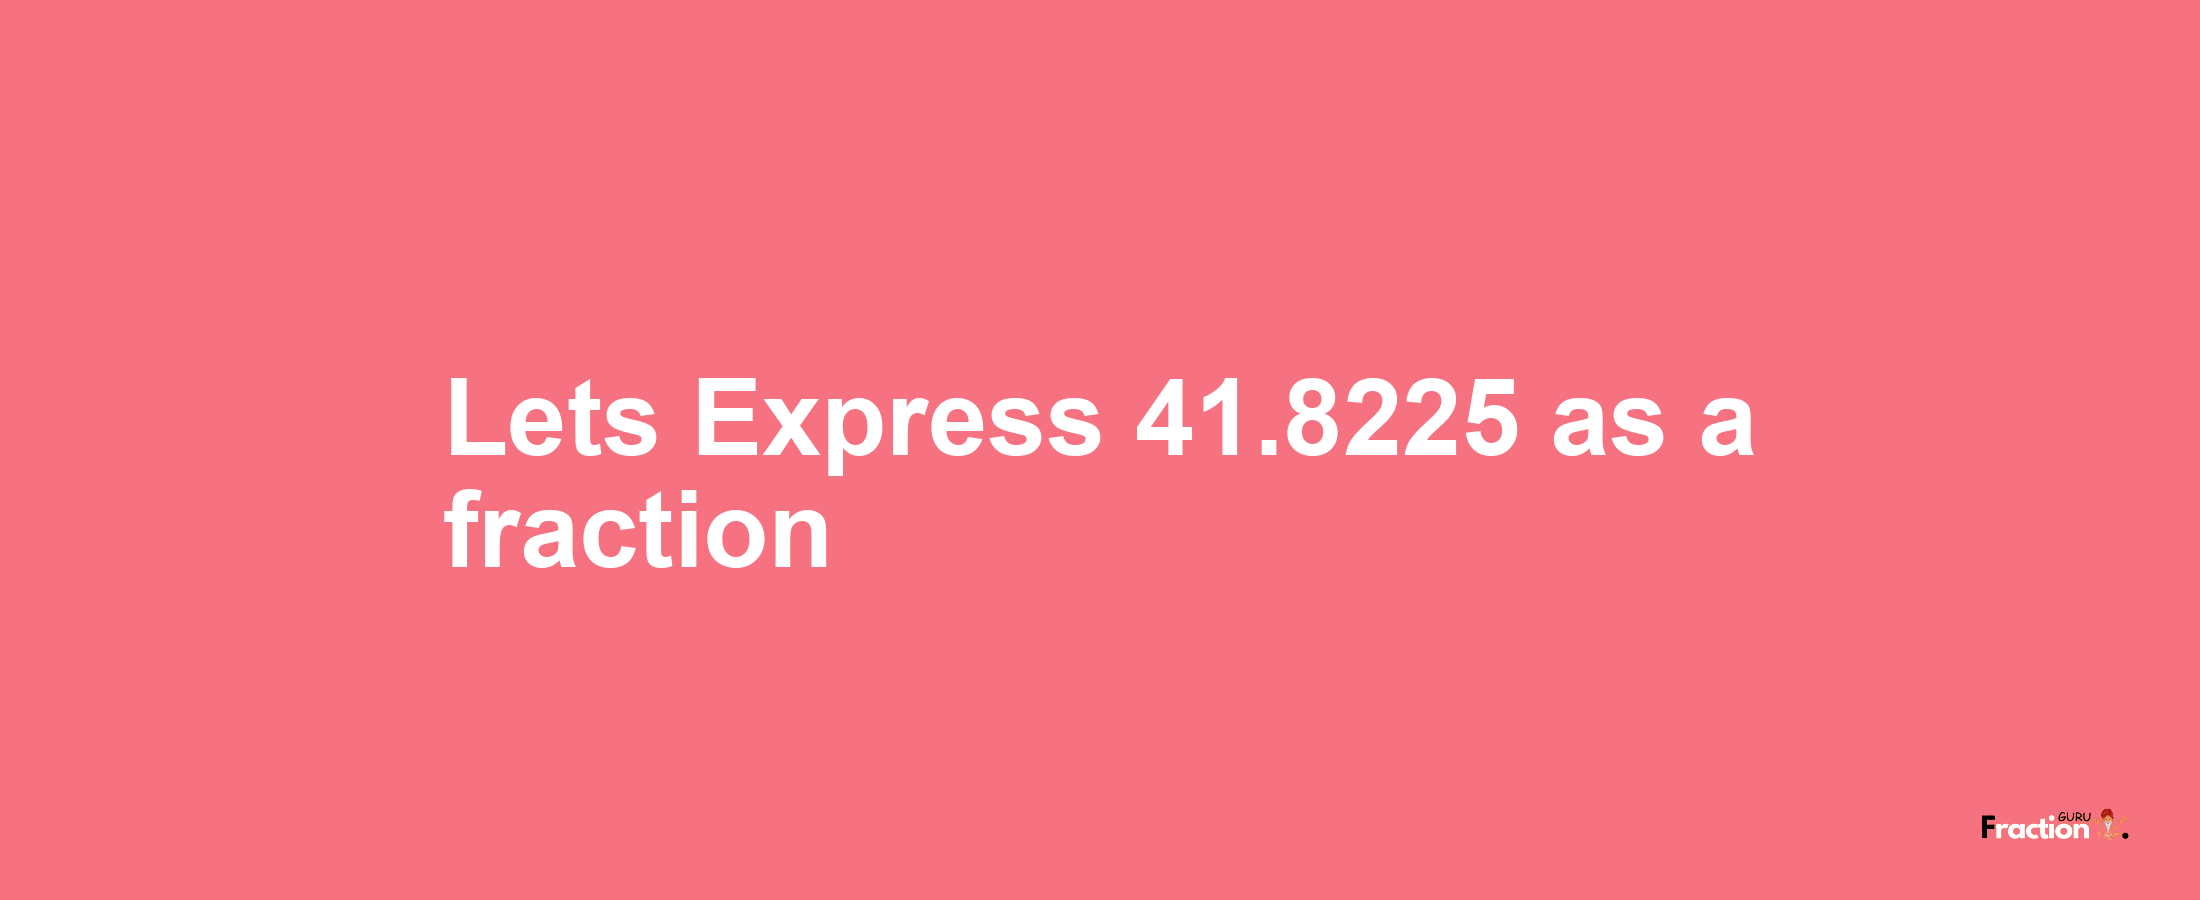 Lets Express 41.8225 as afraction